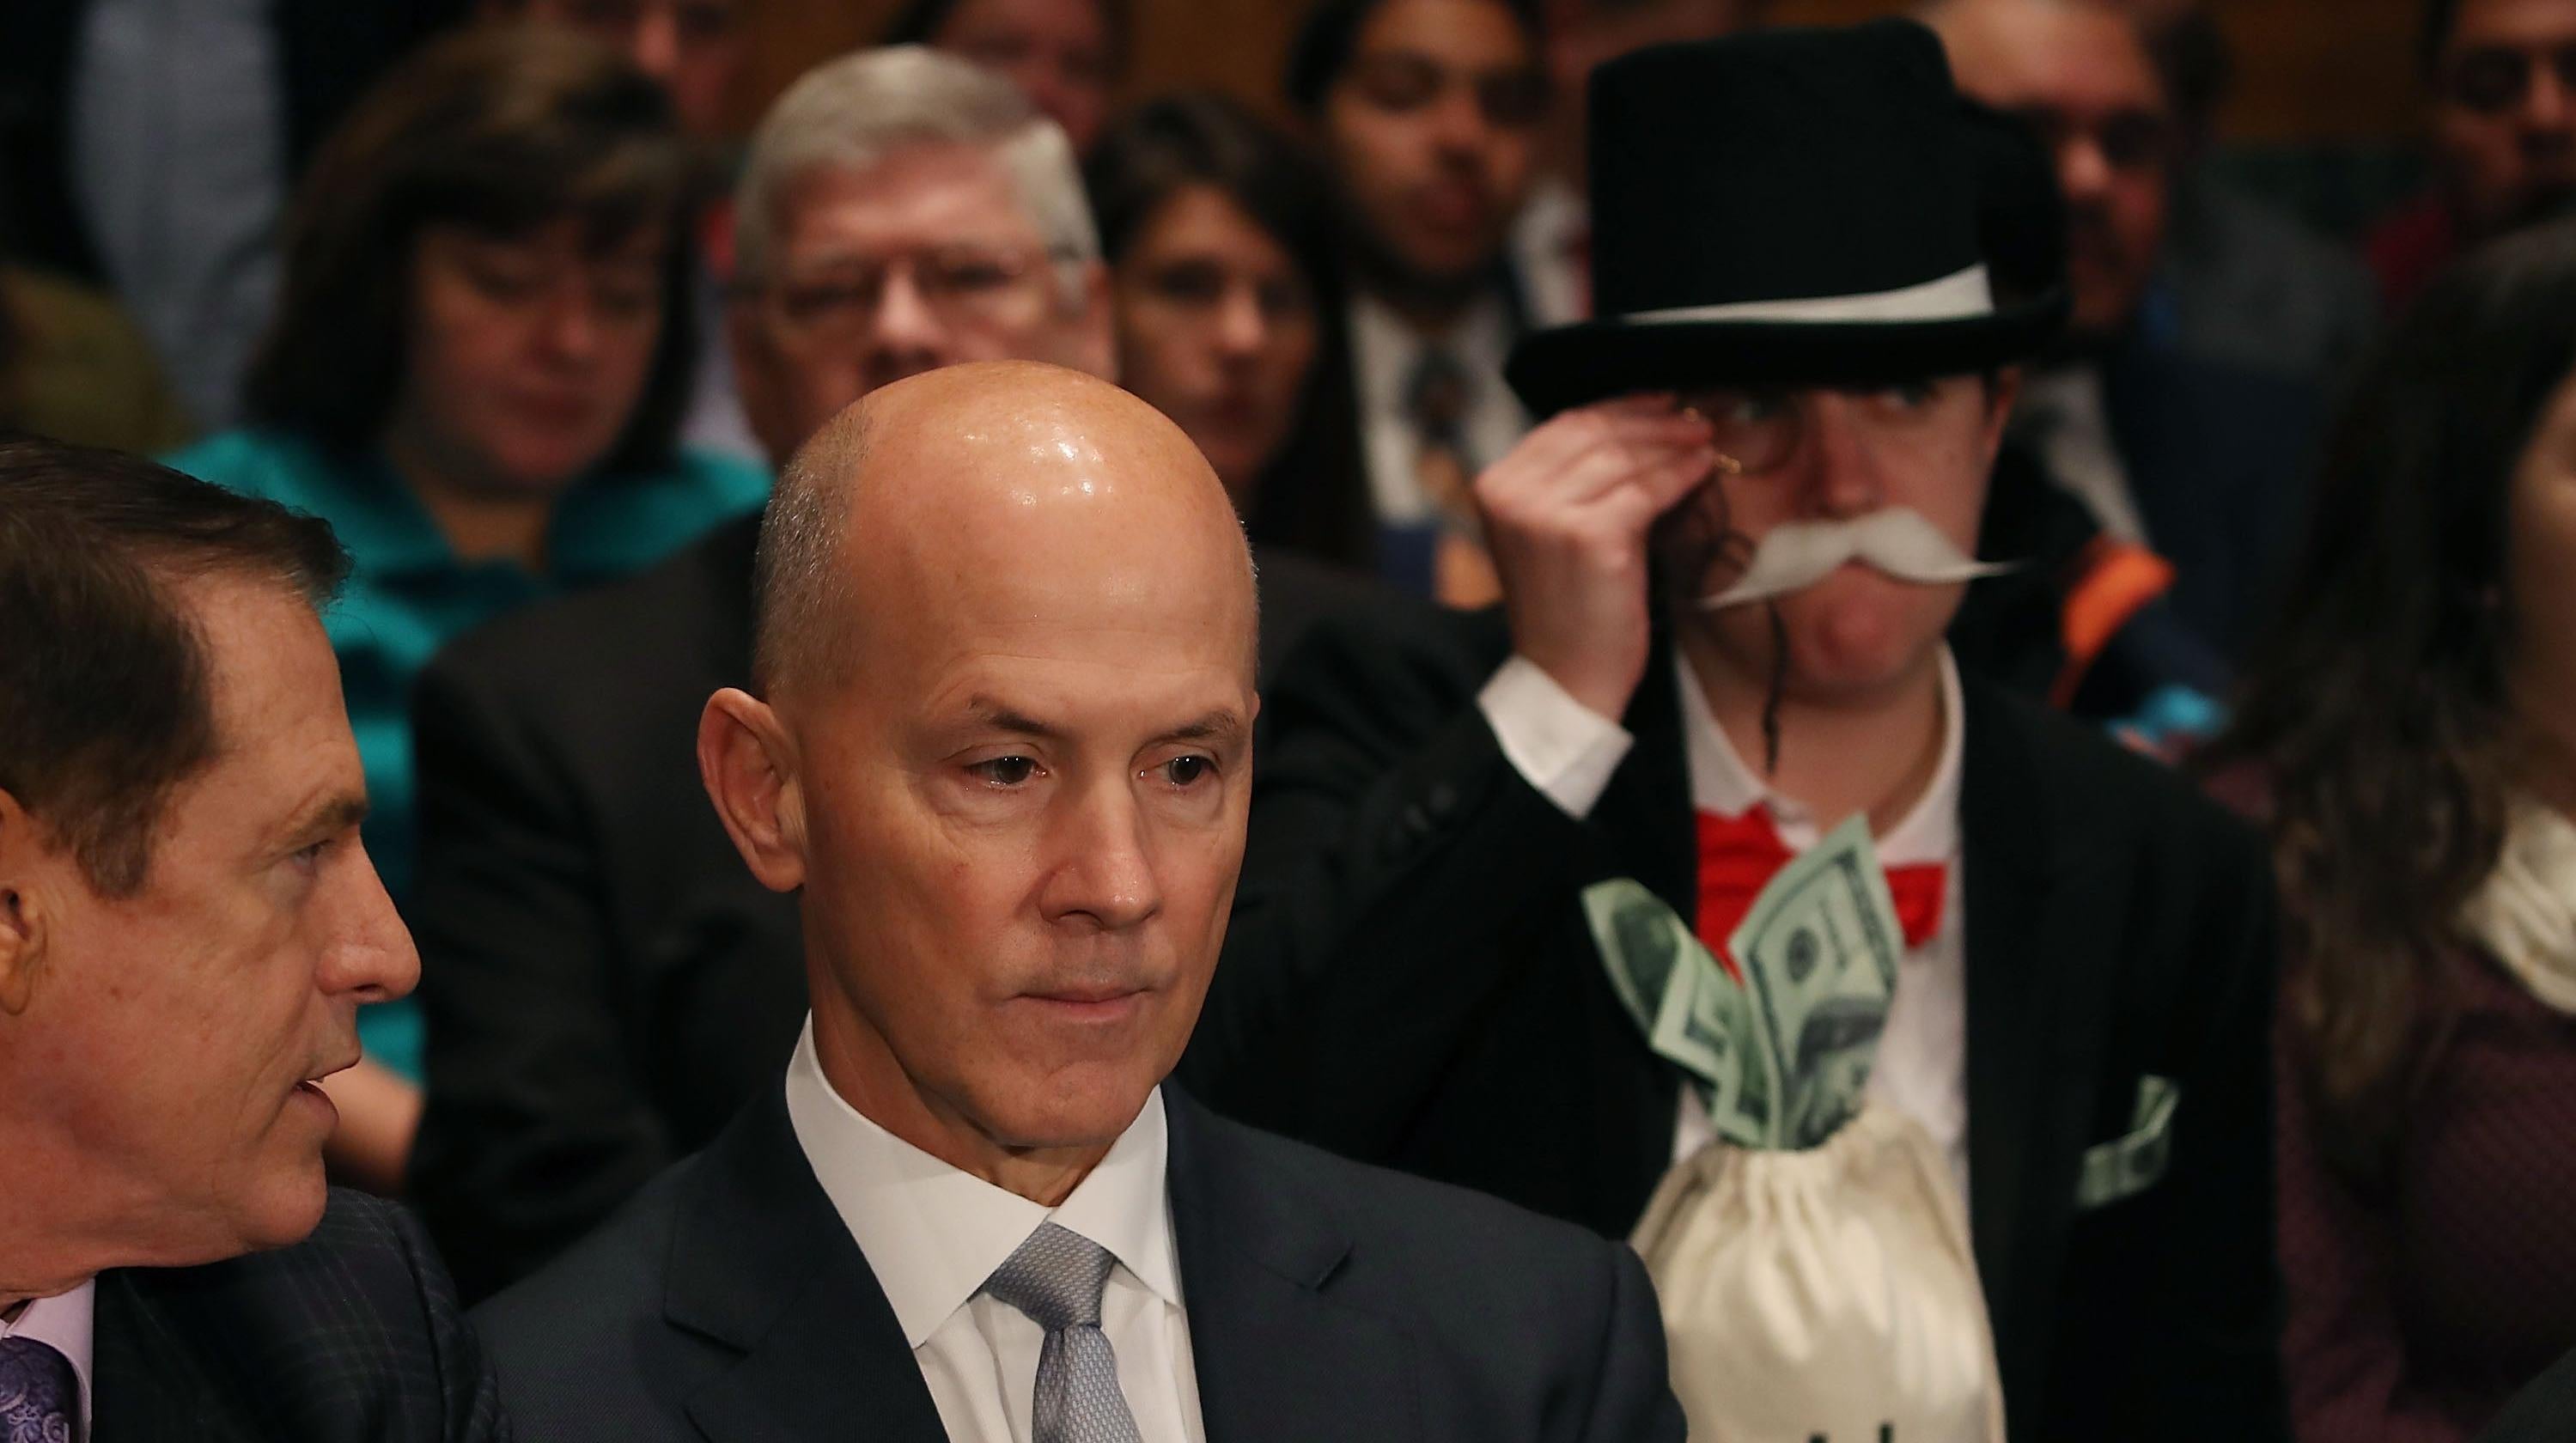  Former Equifax CEO Richard Smith prepares to testify before the Senate Banking, Housing and Urban Affairs Committee in the Hart Senate Office Building on Capitol Hill October 4, 2017 in Washington, DC. (Photo: Mark Wilson, Getty Images)